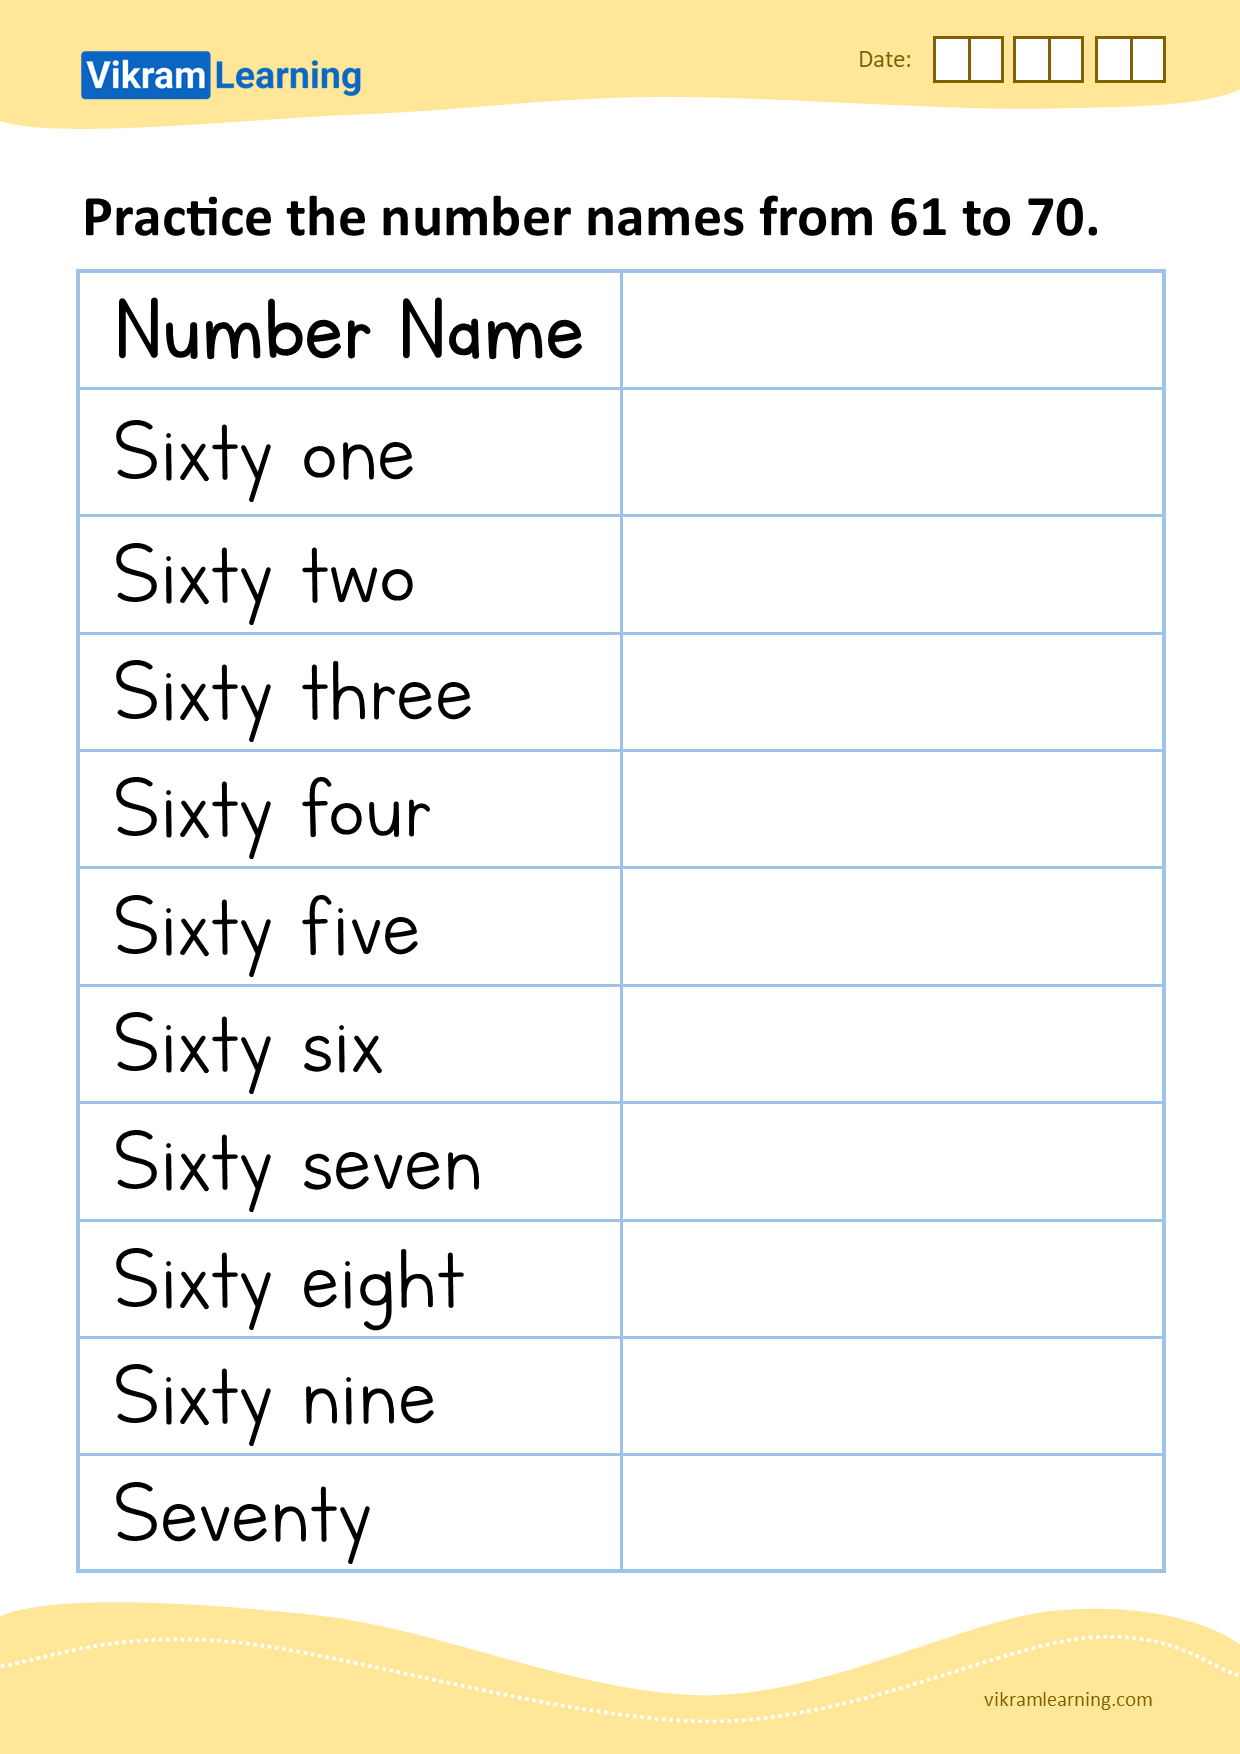 Download practice the number name from 61 to 70 worksheets